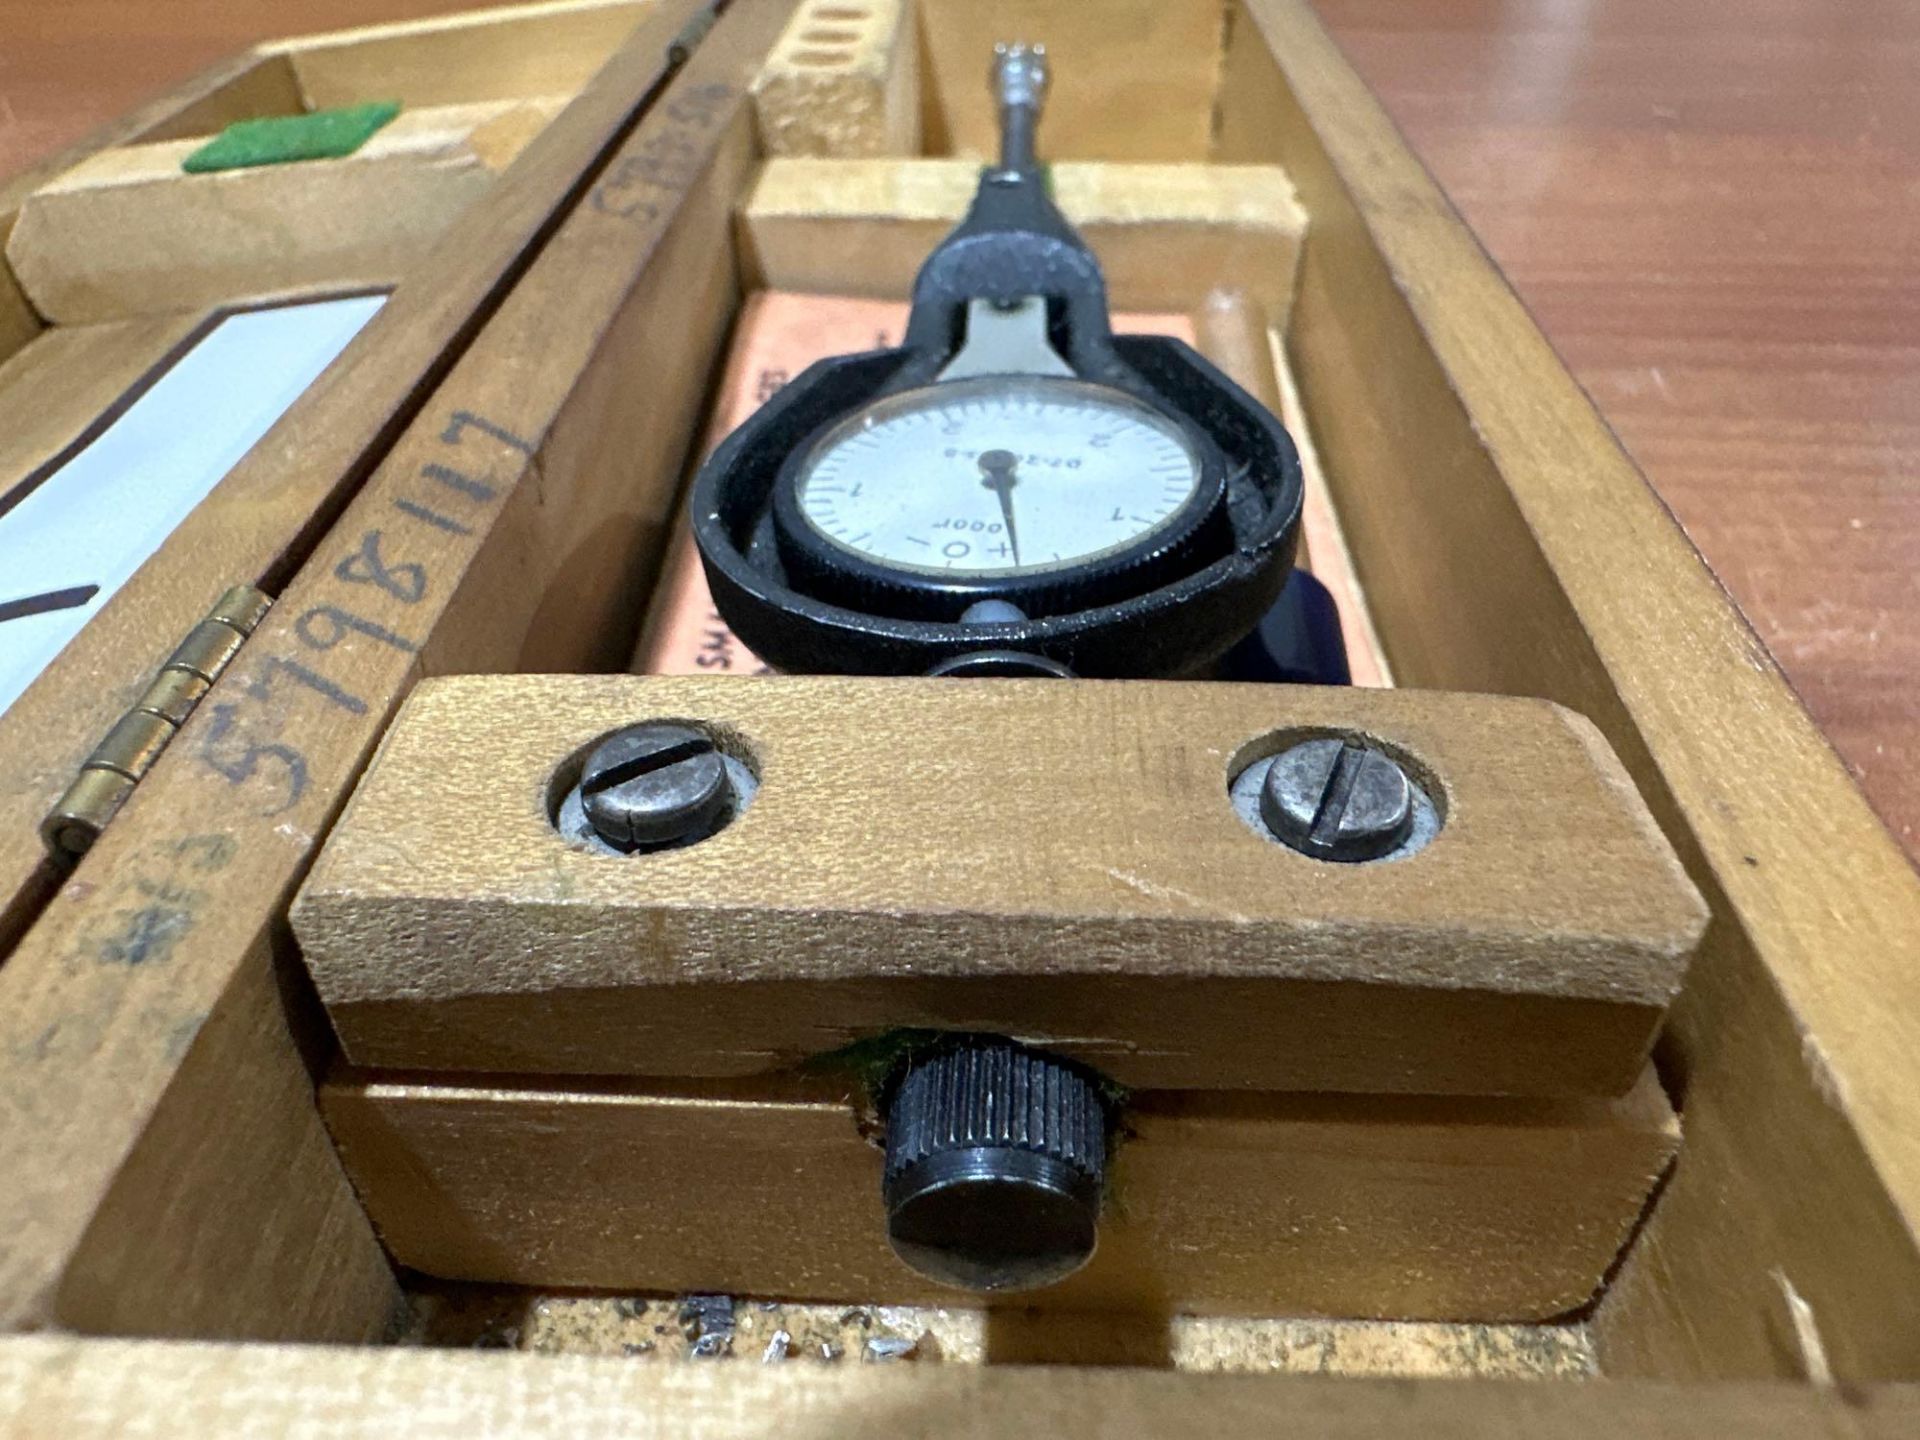 Standard Gage Company 3/8”-5/8” Dial Bore Gage - Image 5 of 7